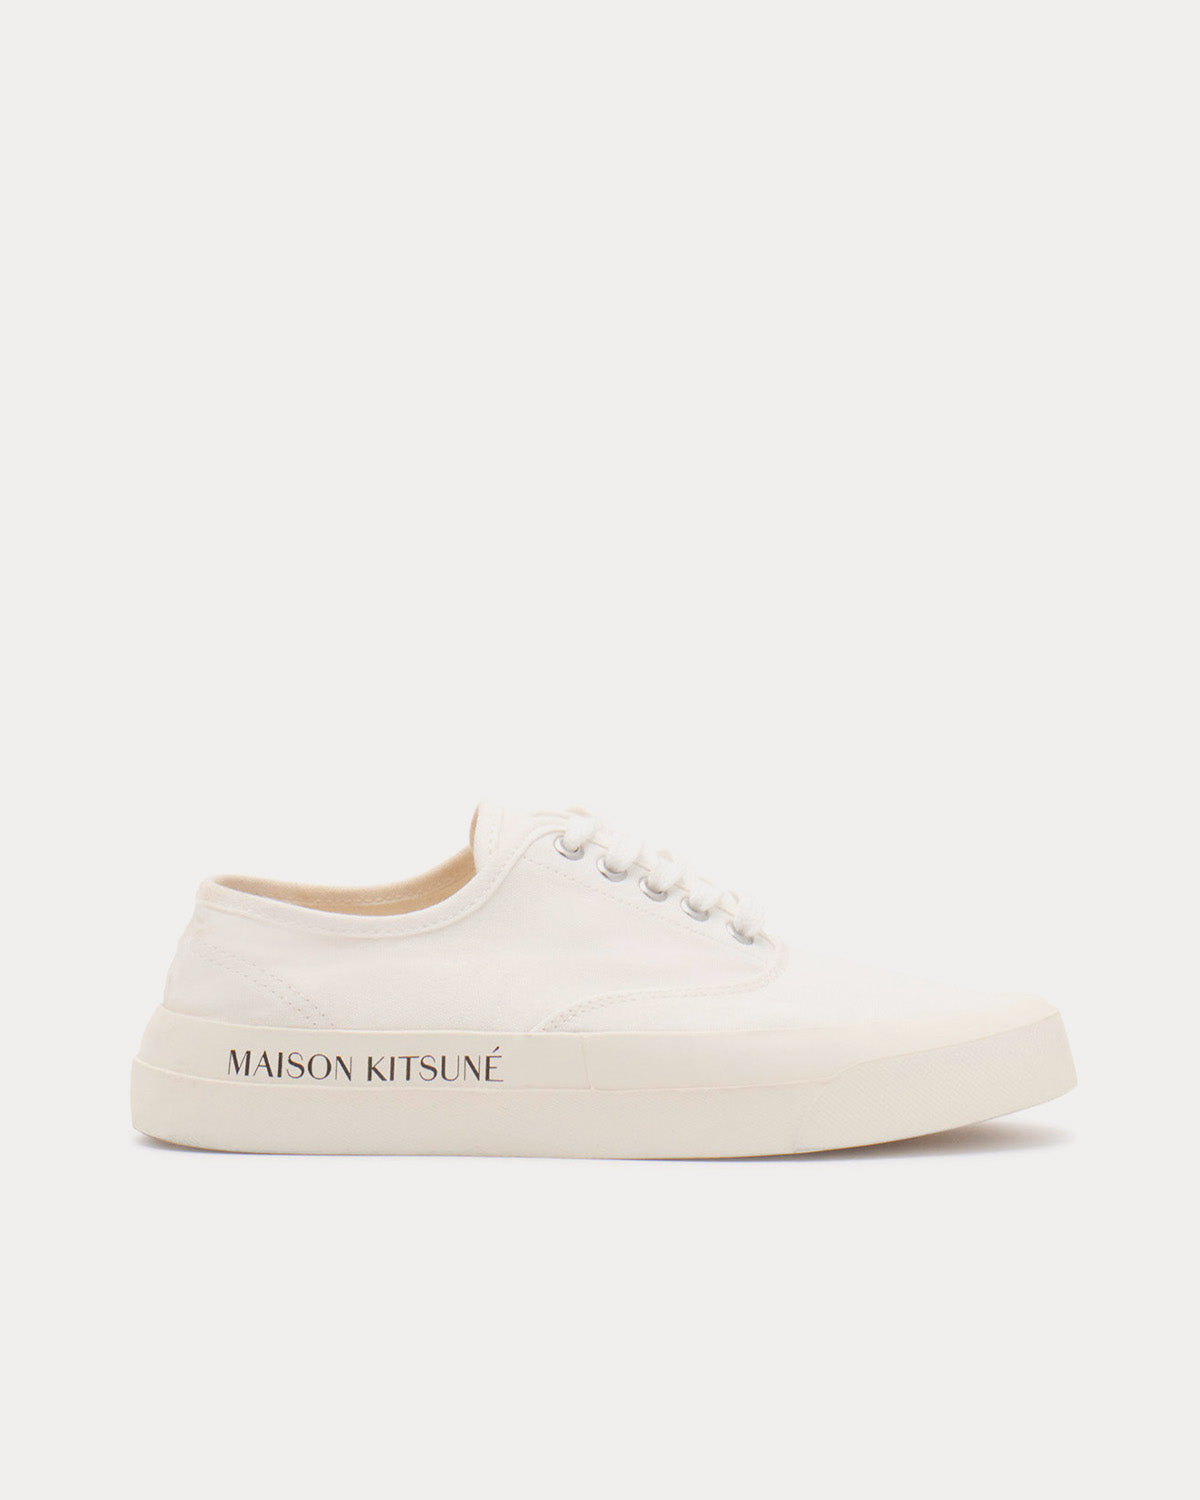 Maison Kitsuné - MK Printed Sole Laced Canvas White Low Top Sneakers